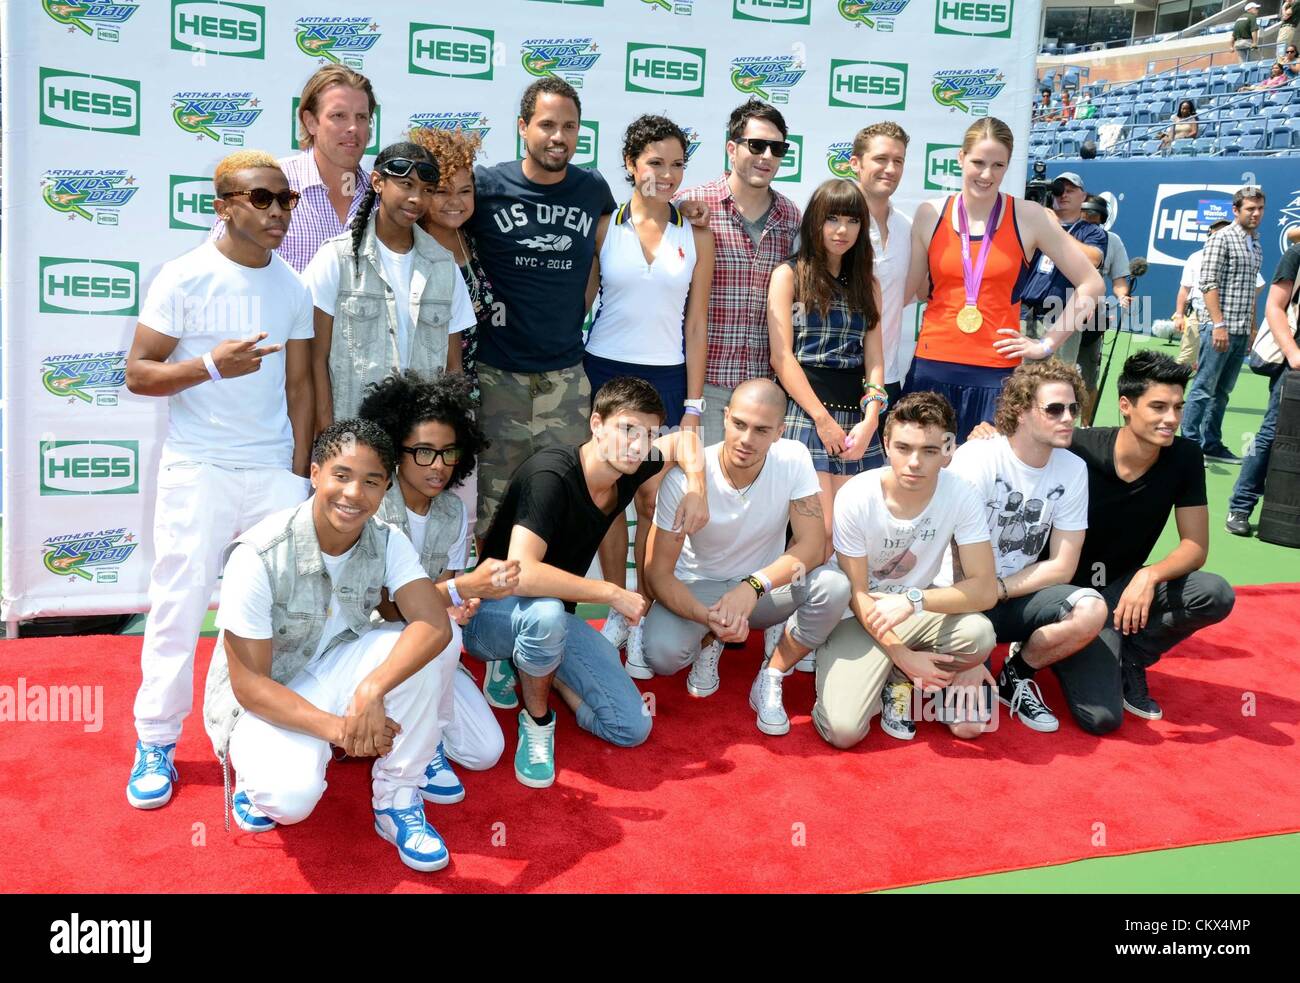 25th Aug 2012. Mindless Behavior, Brad Richards, Rachel Crow, Susie Castillo, Adam Young, Carly Rae Jepsen, Matthew Morrison, Missy Franklin, The Wanted in attendance for 2012 Arthur Ashe Kids' Day, USTA Billie Jean King National Tennis Center, Flushing, NY August 25, 2012. Photo By: Derek Storm/Everett Collection Stock Photo